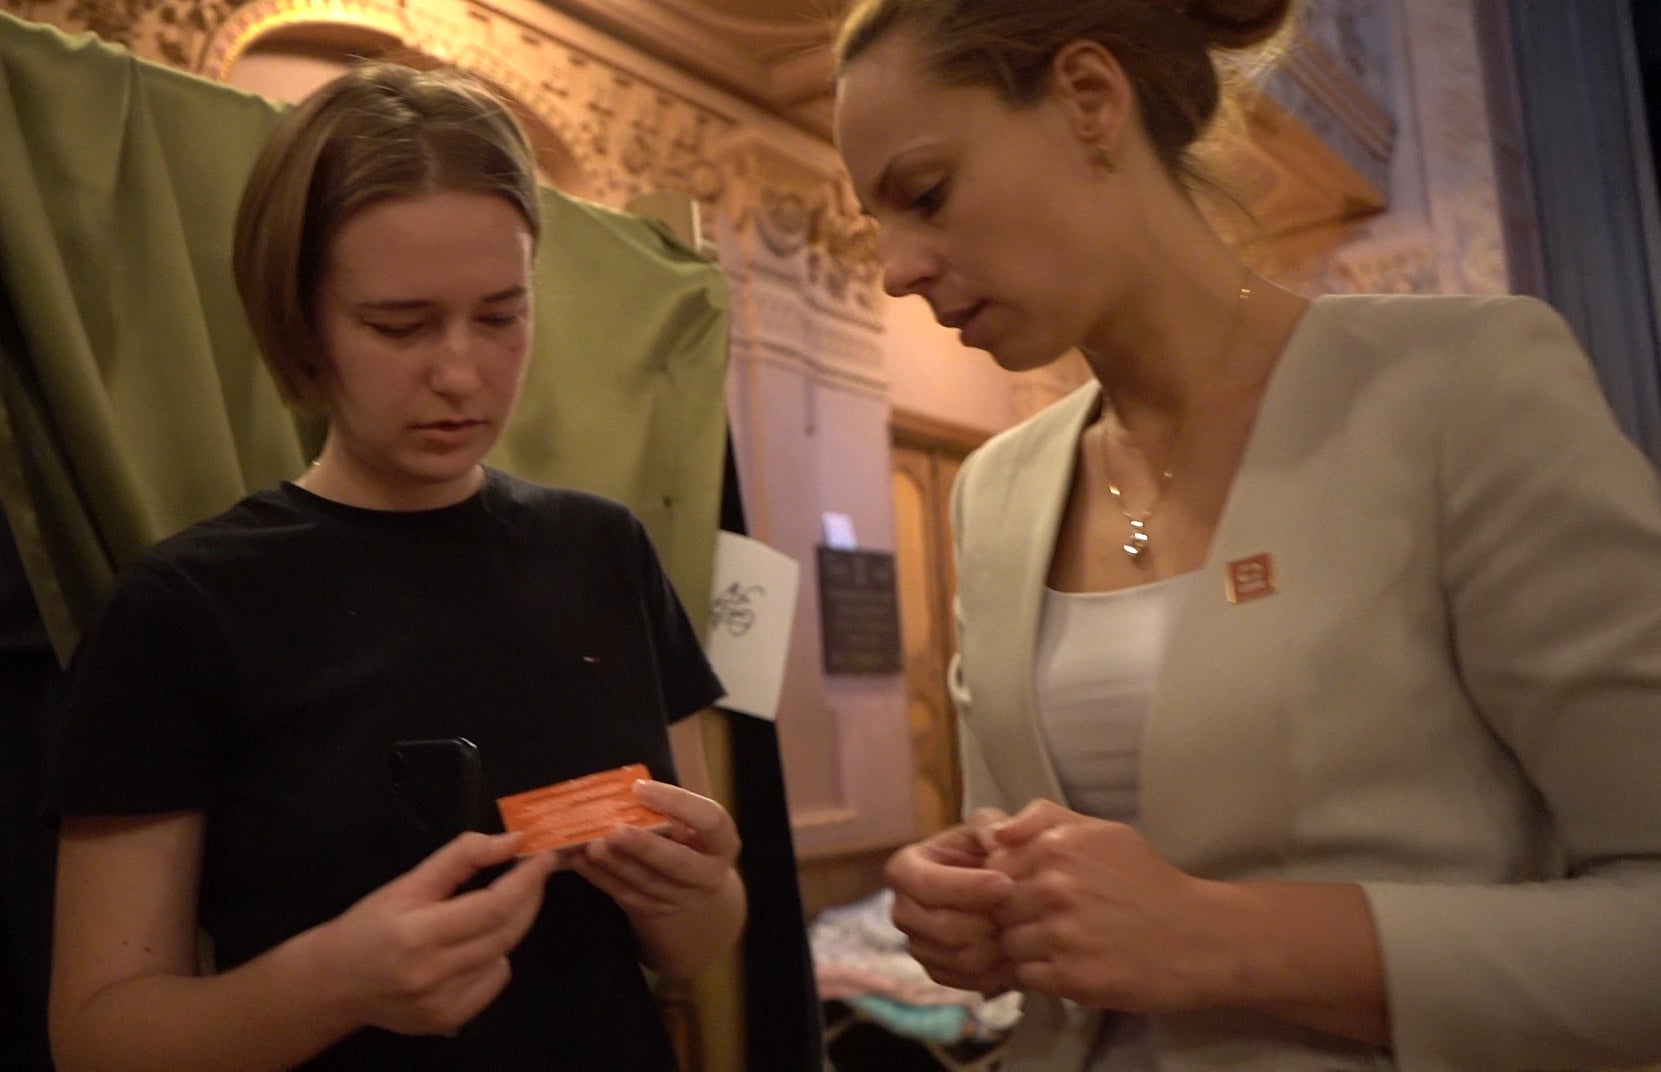 Image of CARE staff member sharing an information card with a refugee woman